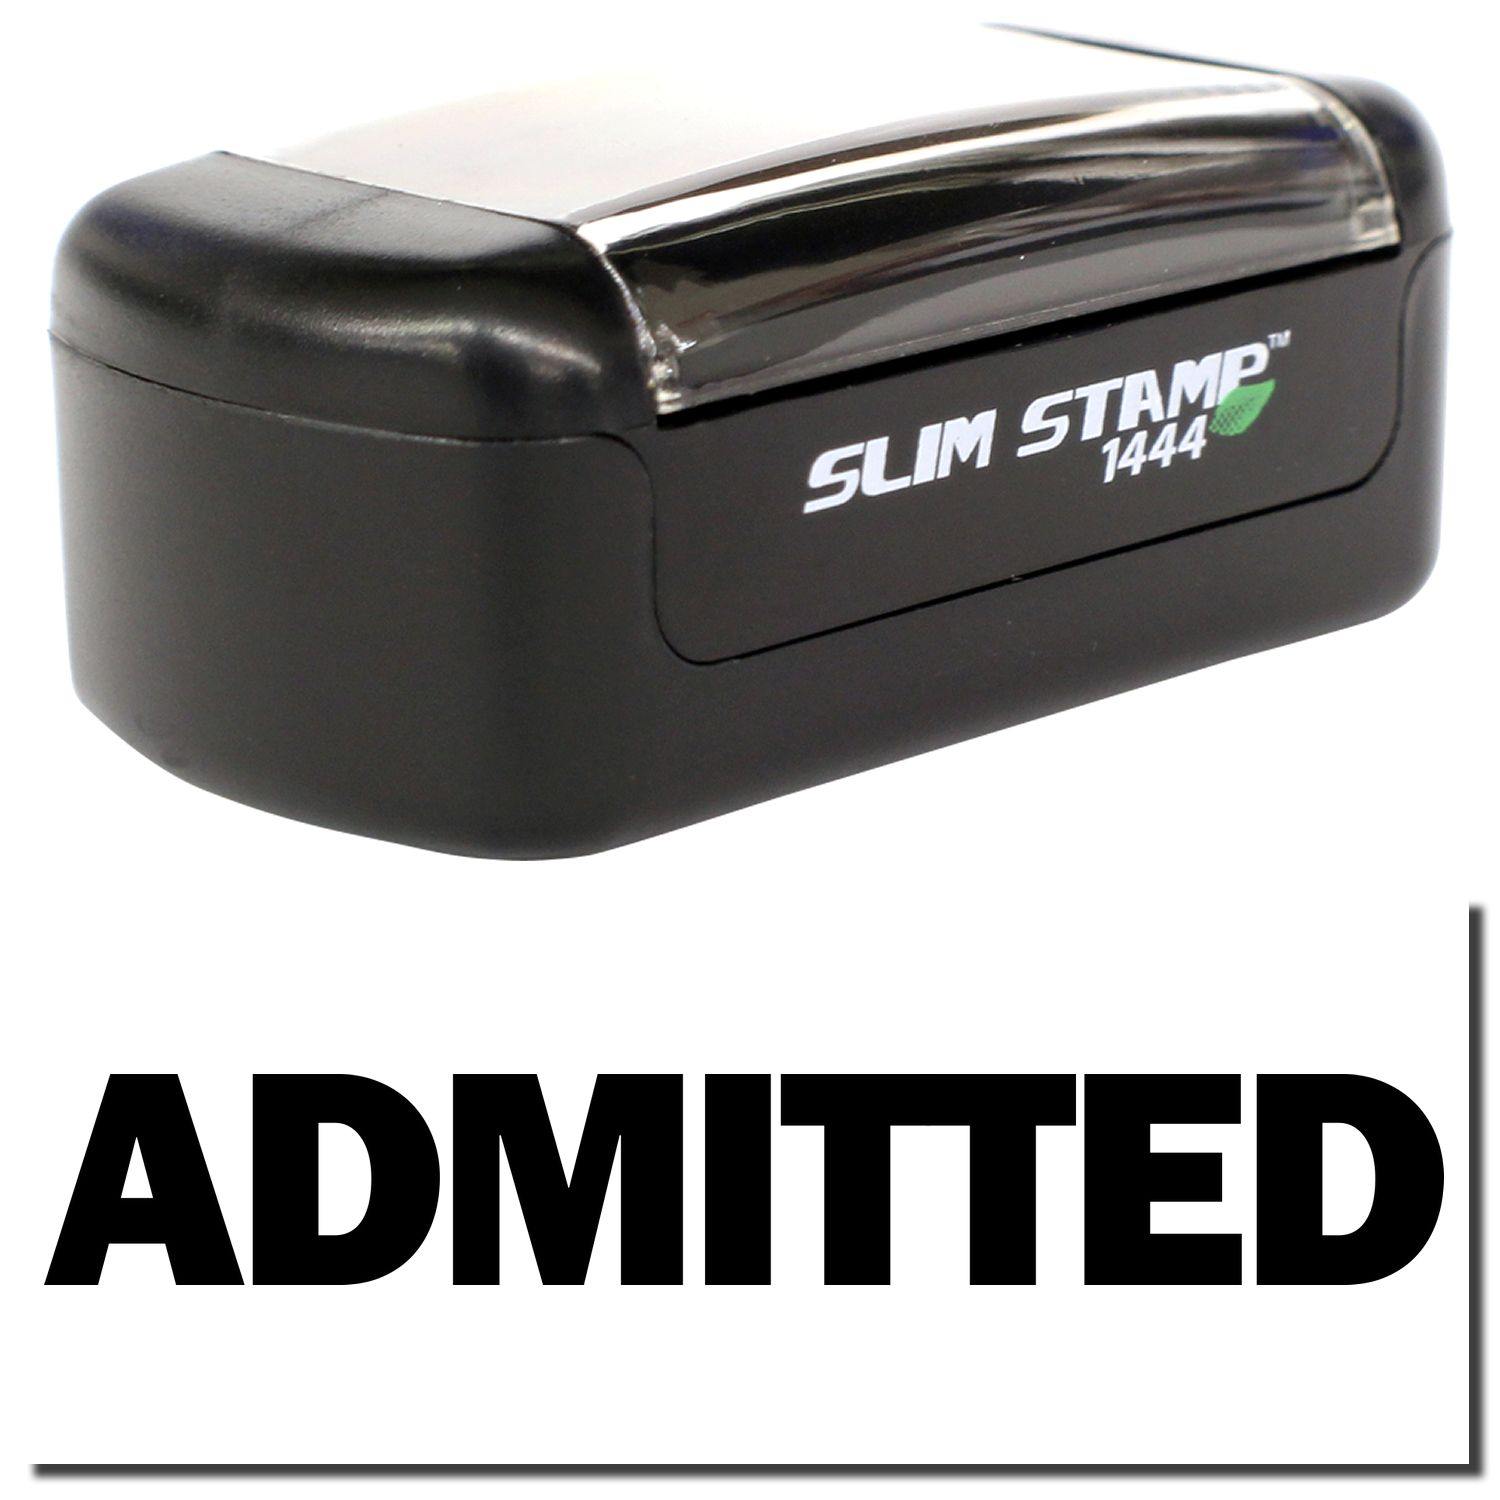 A stock office pre-inked stamp with a stamped image showing how the text "ADMITTED" in bold font is displayed after stamping.